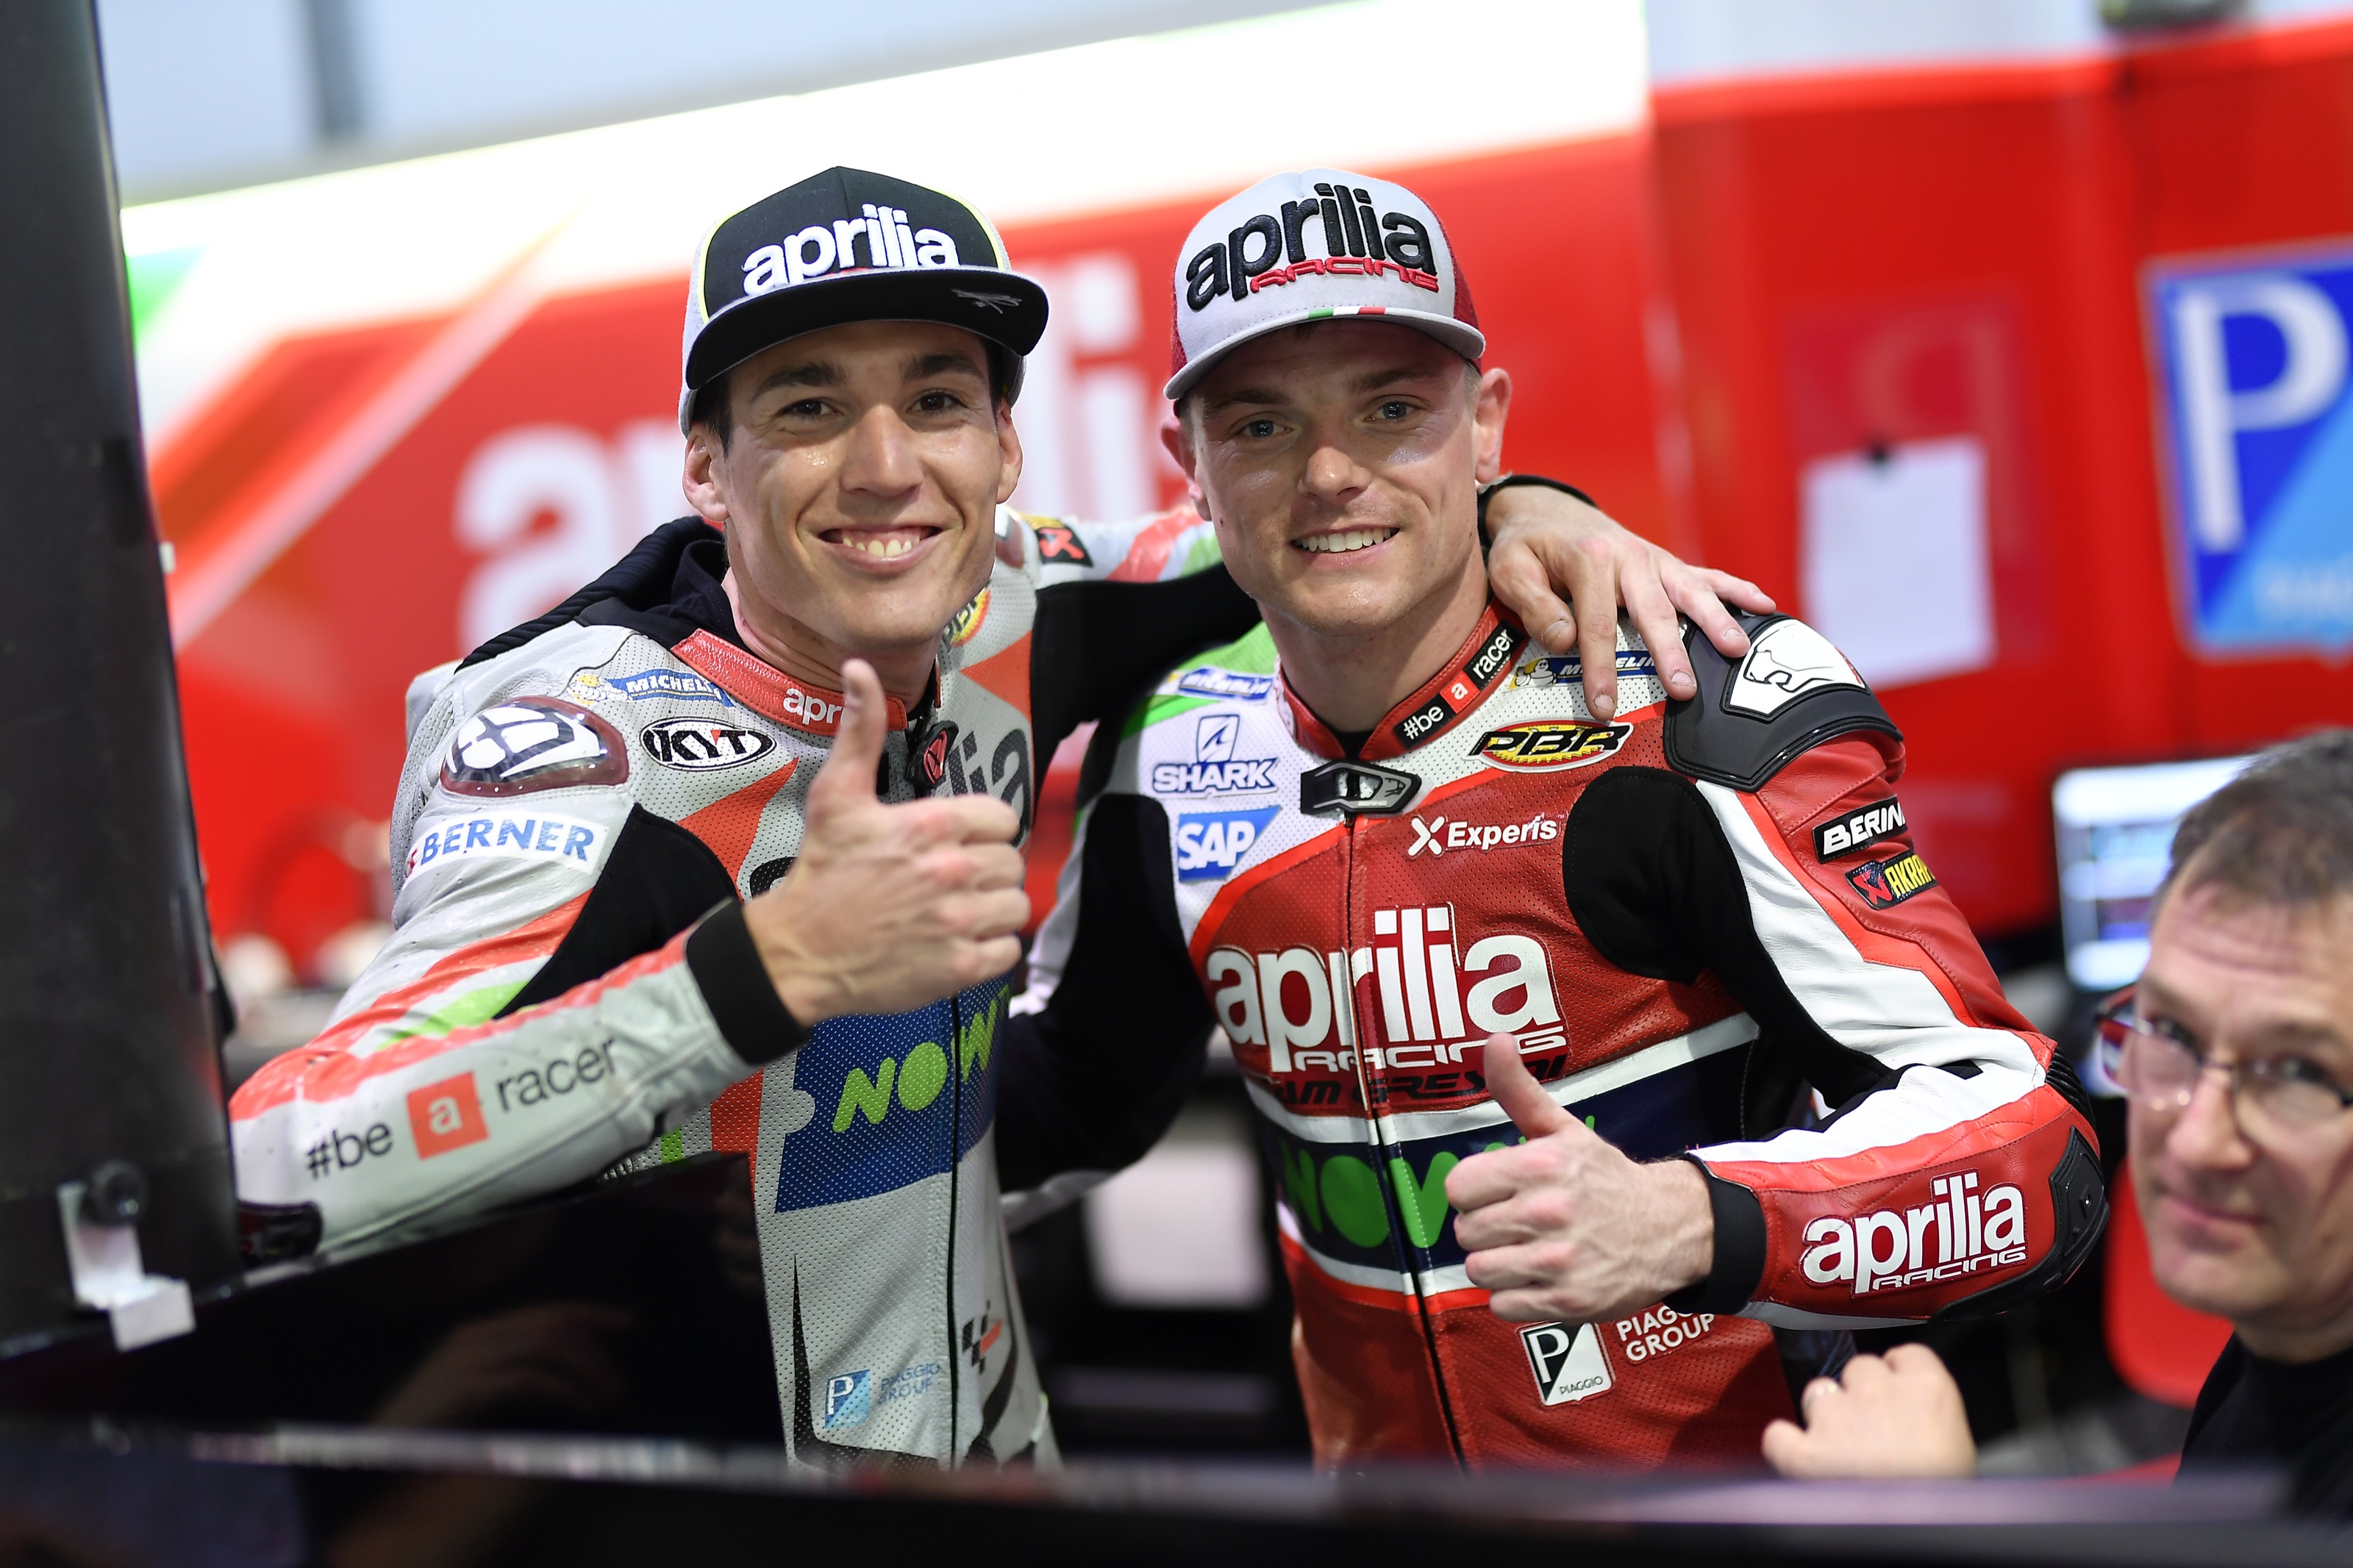 Berner and Team Gresini together for the 15th consecutive year ...